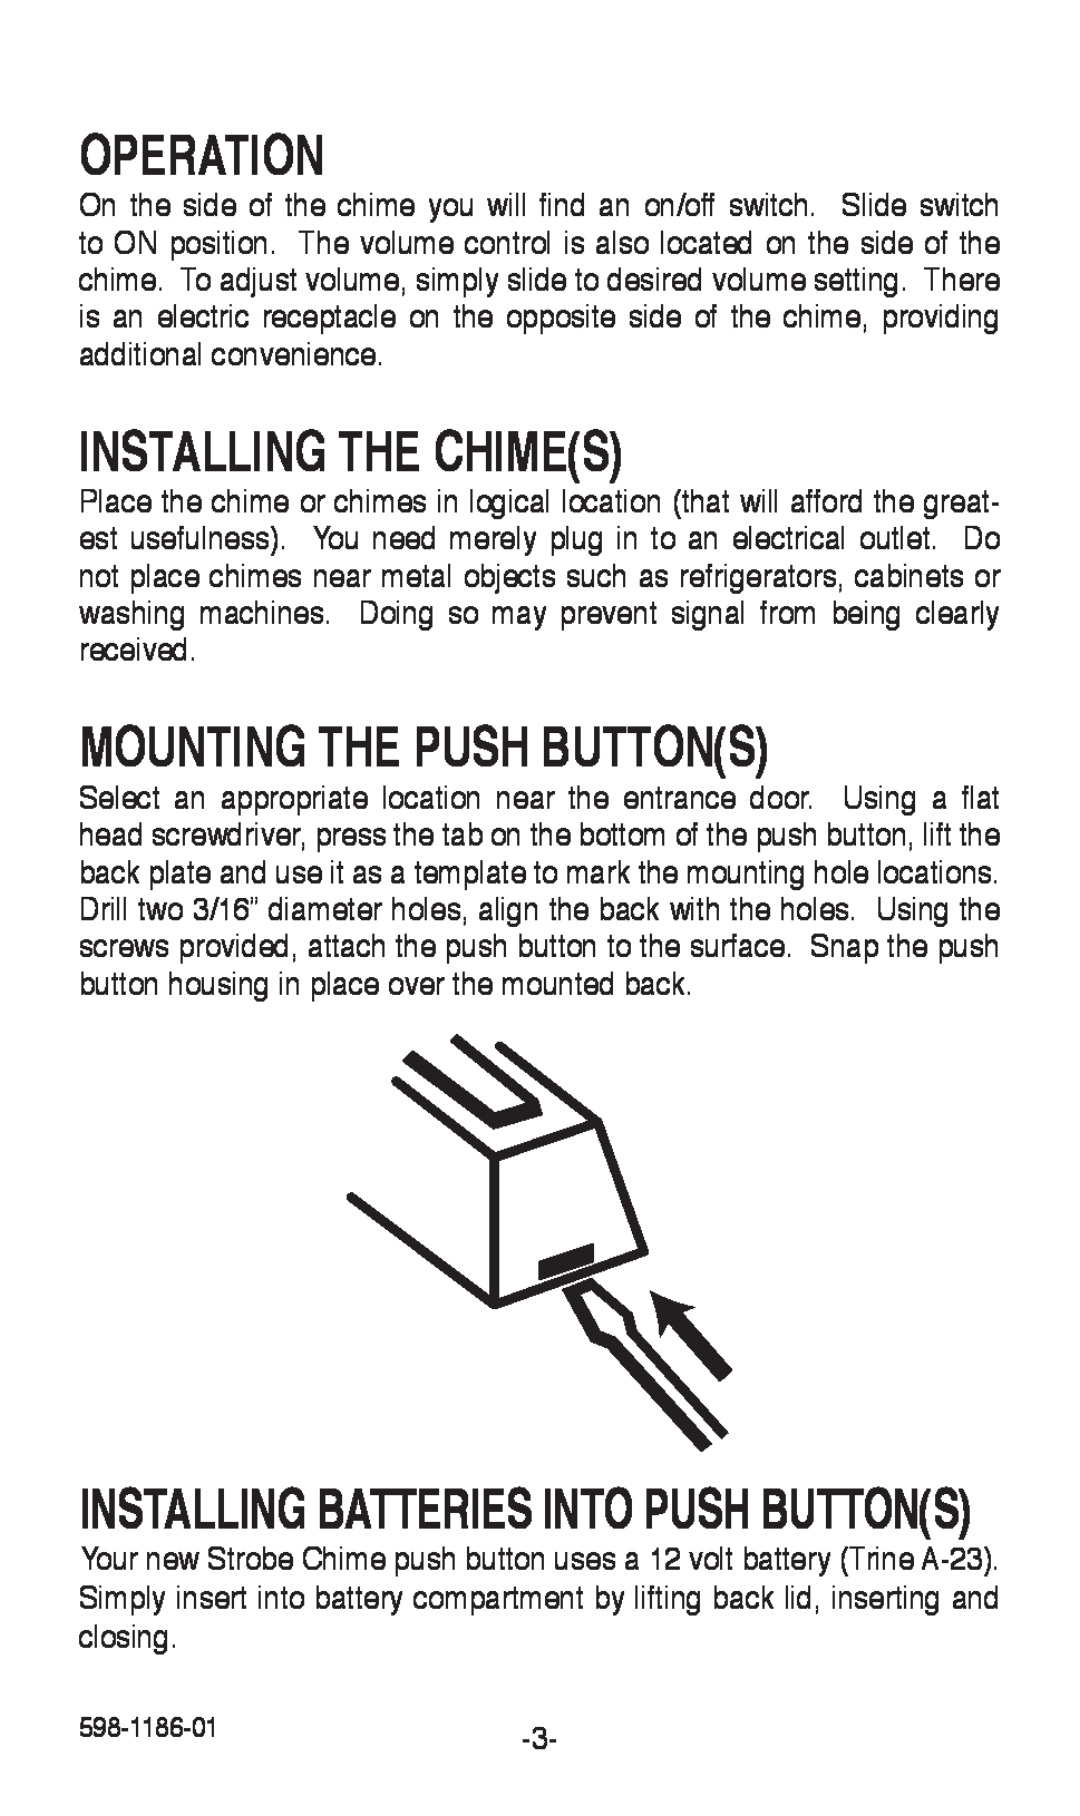 Desa 598-1186-01 Operation, Installing The Chimes, Mounting The Push Buttons, Installing Batteries Into Push Buttons 